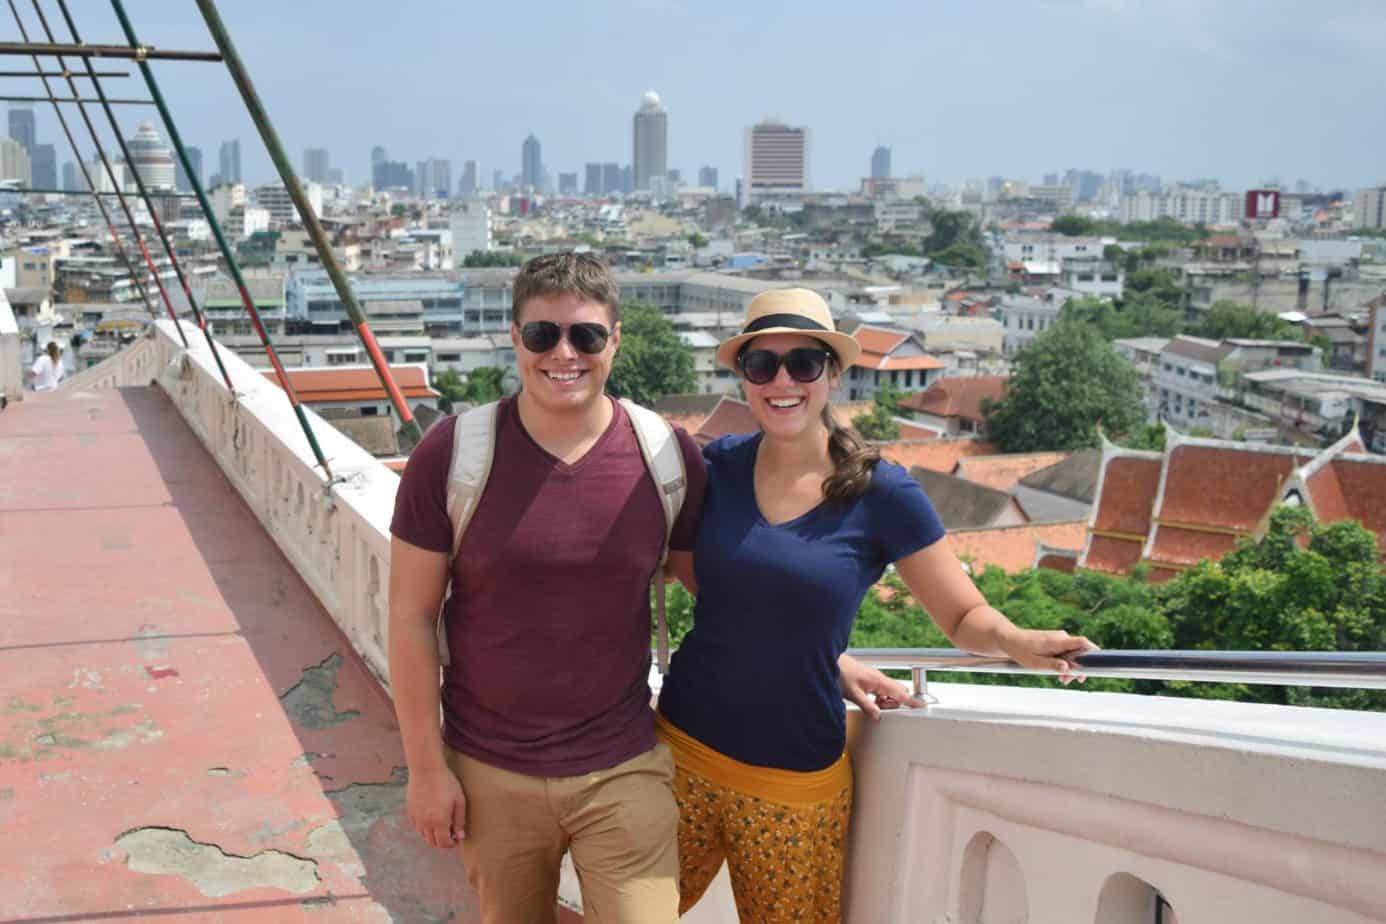 A couple holds one another and poses with a city skyline behind them.